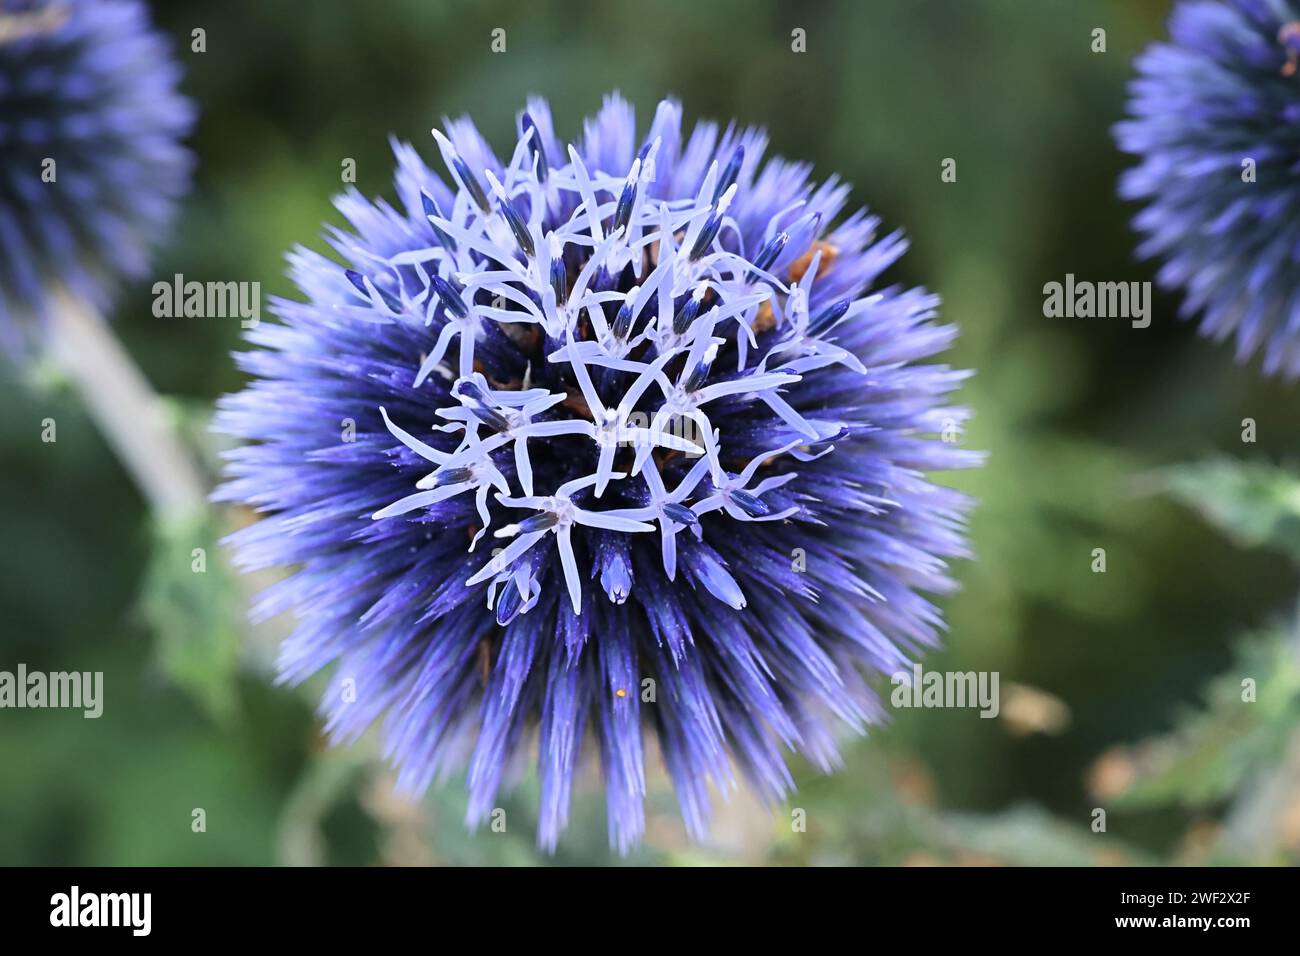 Echinops bannaticus, known as the blue globe-thistle, popular garden plant Stock Photo